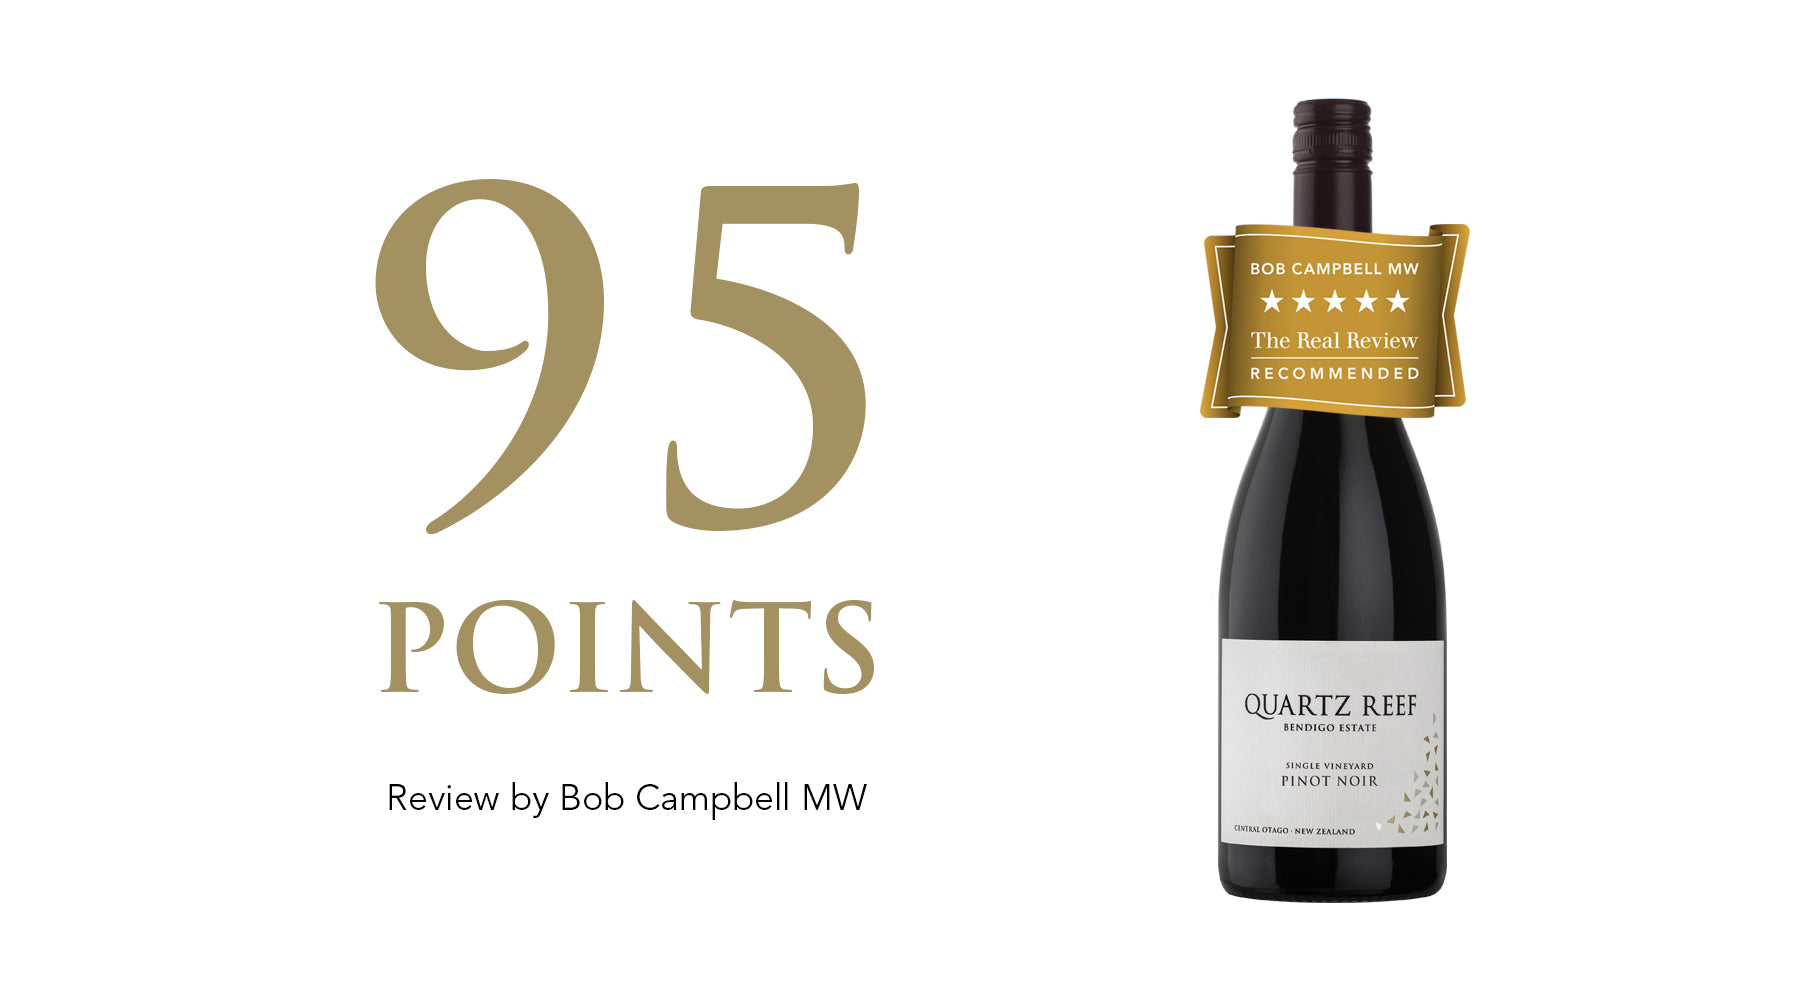 Pinot Noir 2017: Awarded 95 Points and 5 Stars